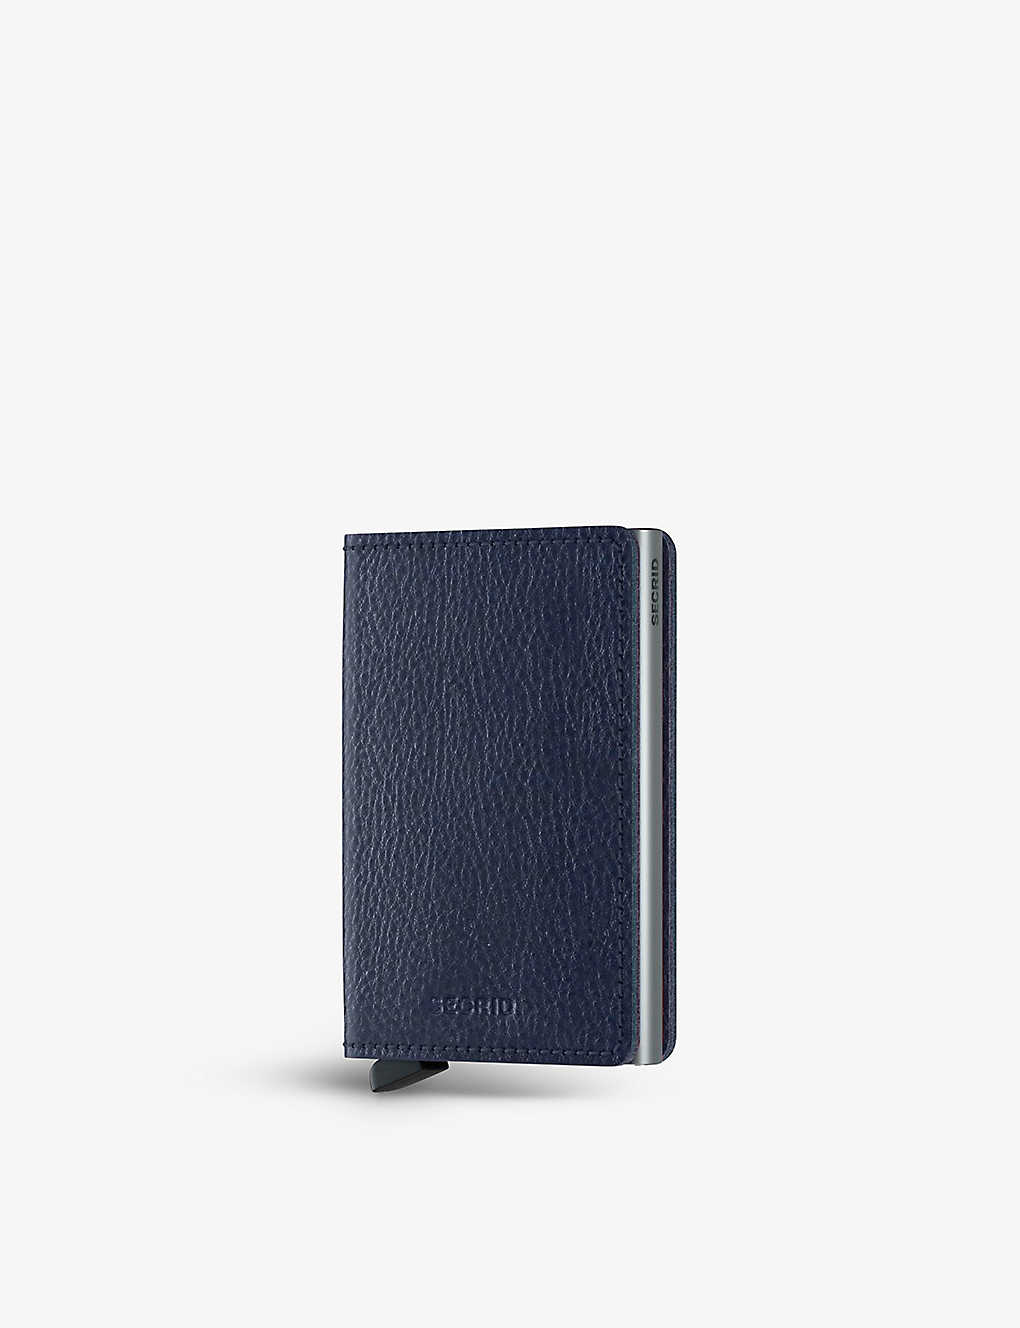 Secrid Svg-navy-silver Slimwallet Vegetable-tanned Leather And Aluminium Card Holder